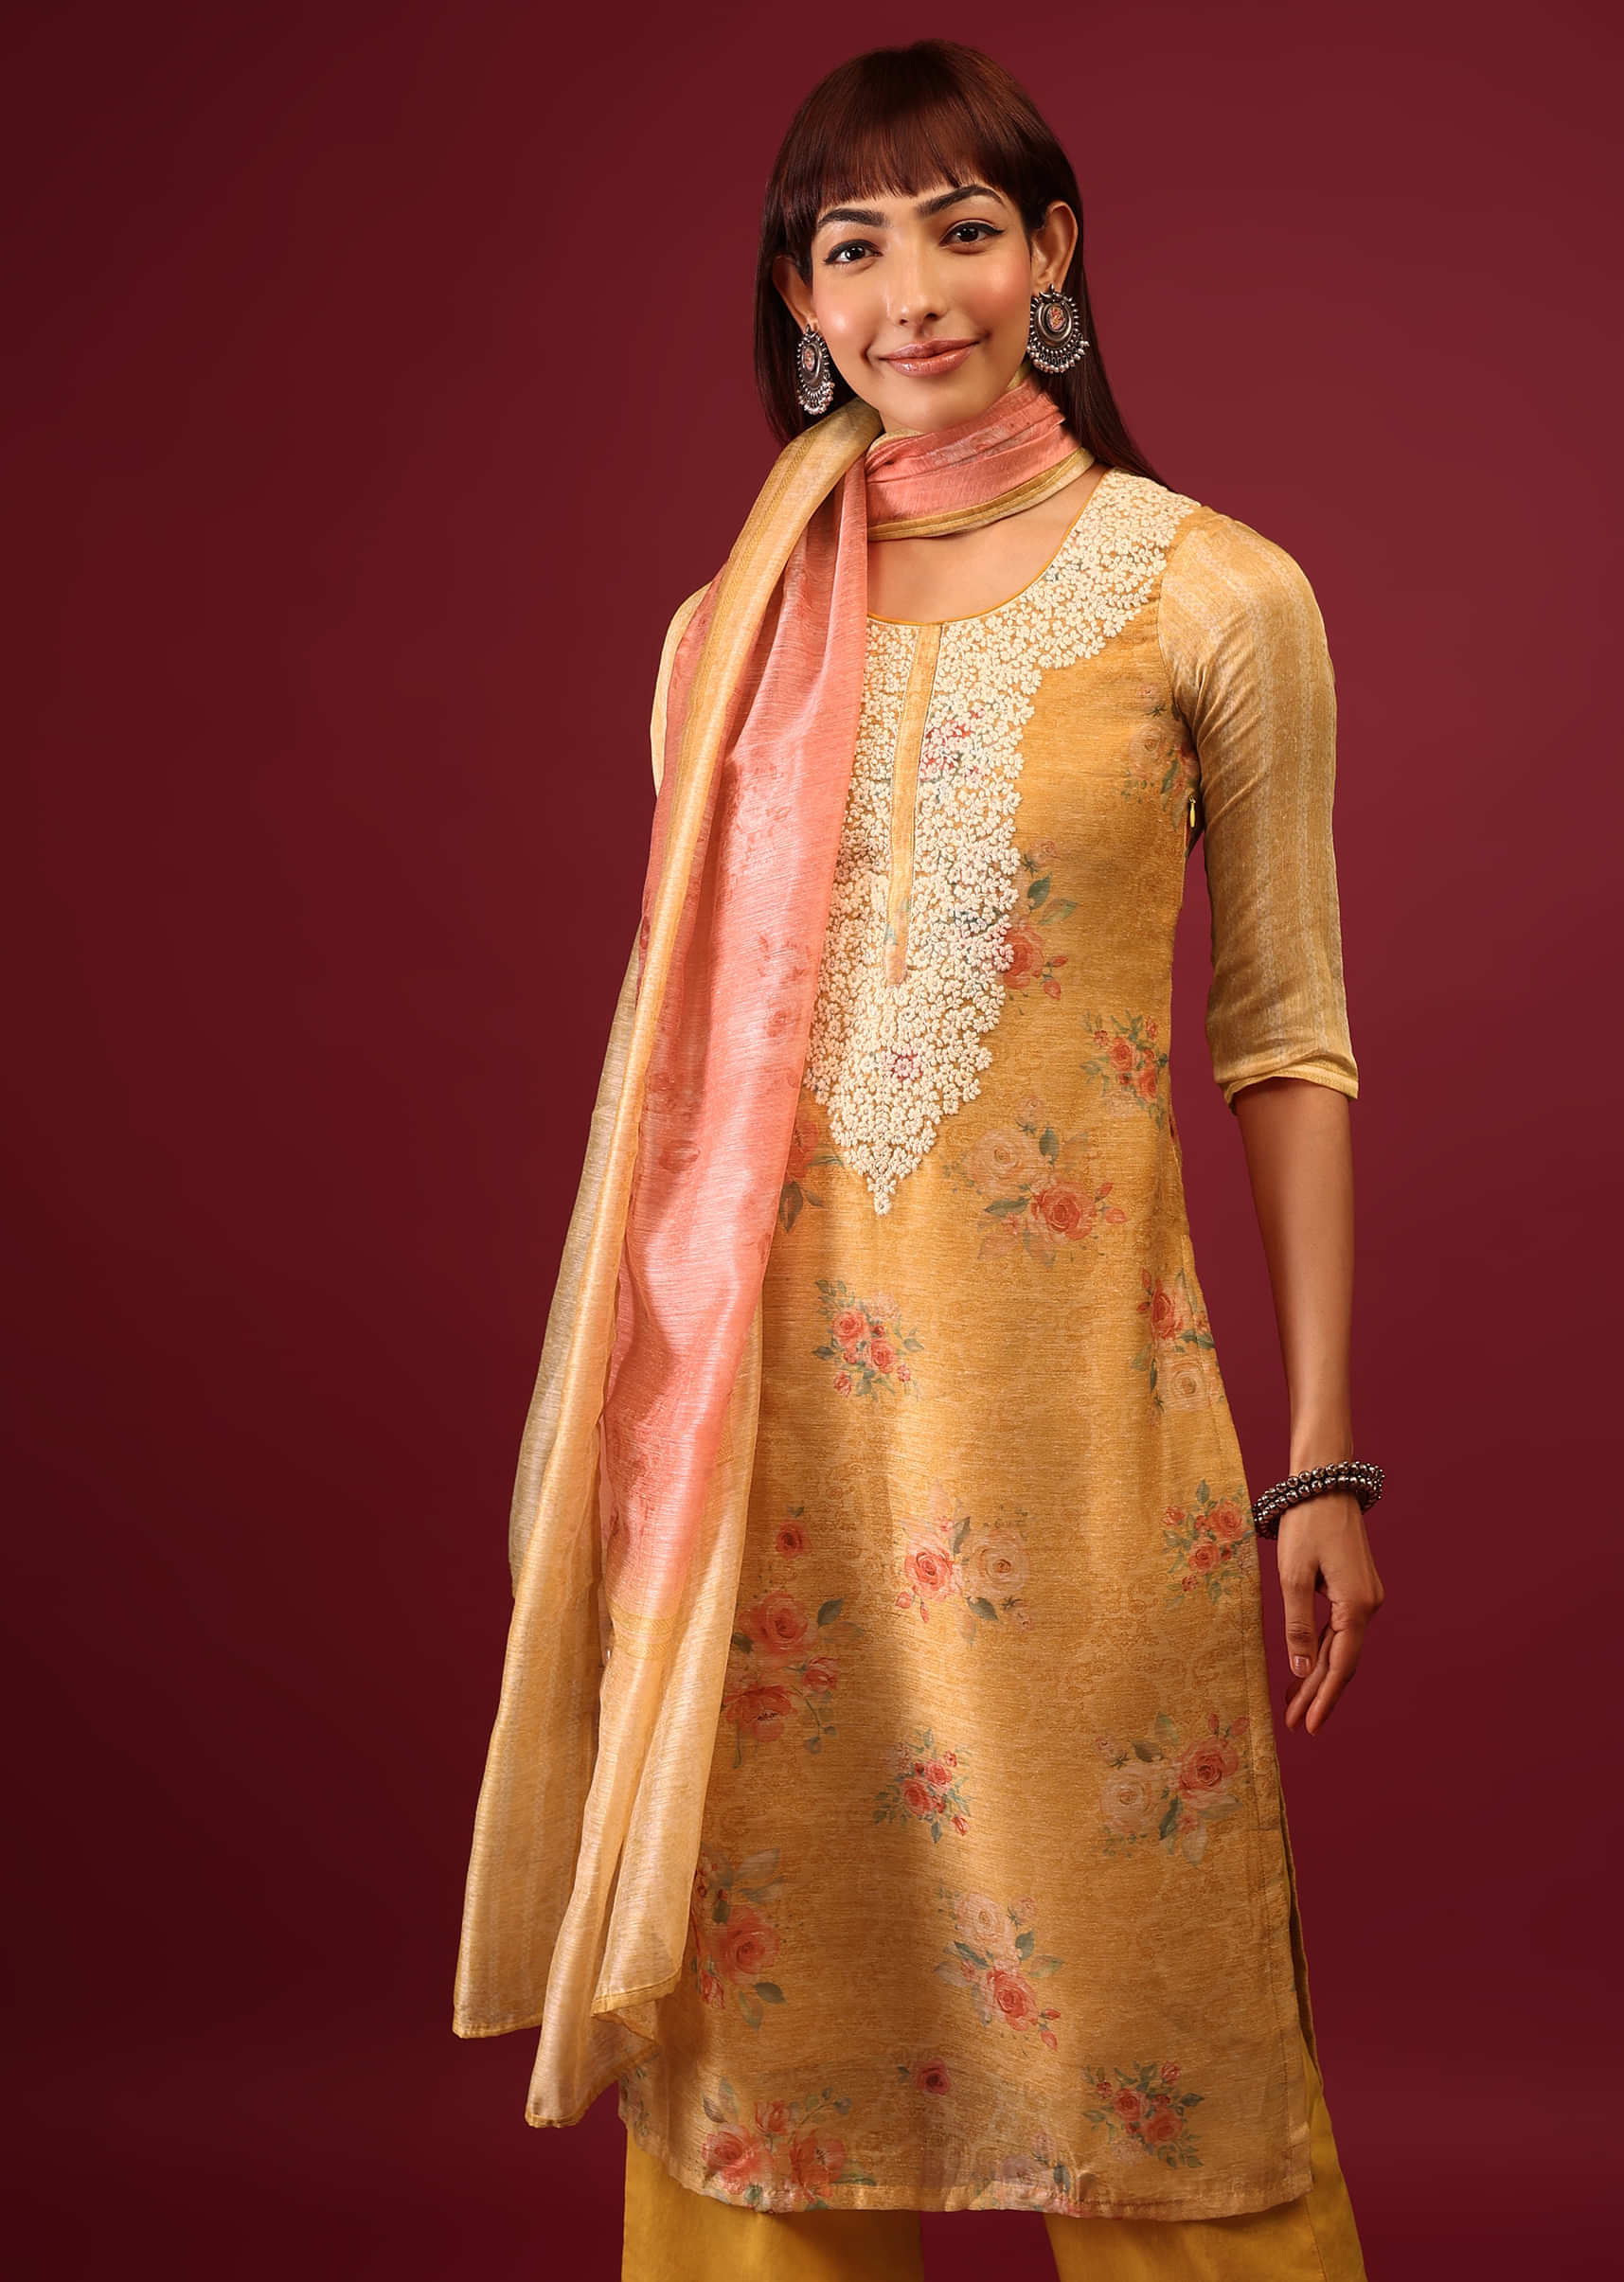 Mustard Yellow Floral Print Palazzo Suit In U Neckline With Thread And Zari Embroidery